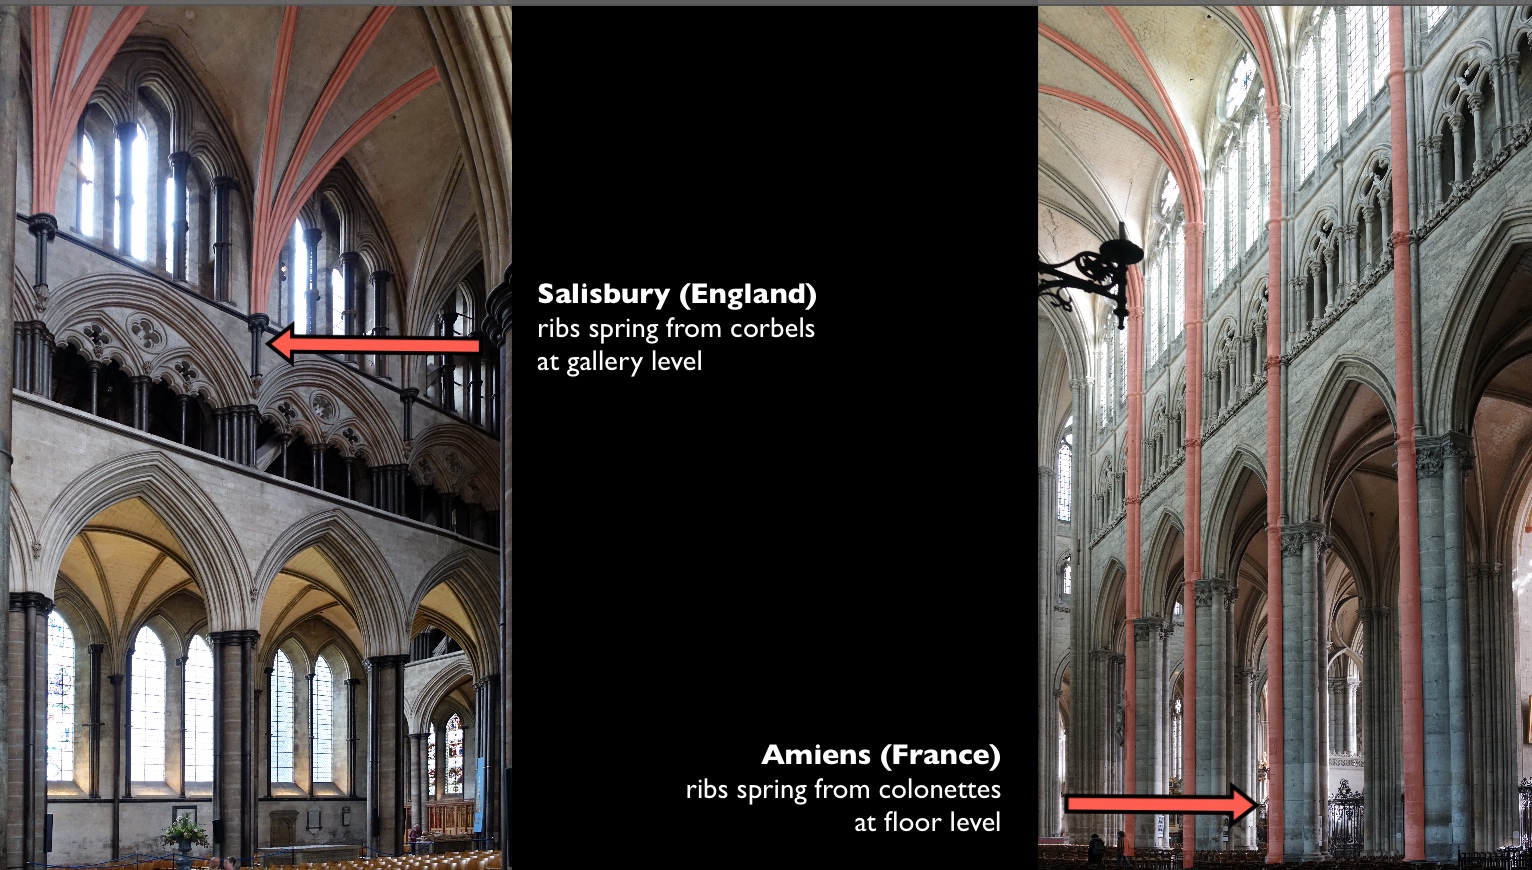 Comparison of the nave elevations of Salisbury Cathedral and Amiens Cathedral Nave elevation, photos: Dr. Steven Zucker (CC BY-NC-SA 4.0)